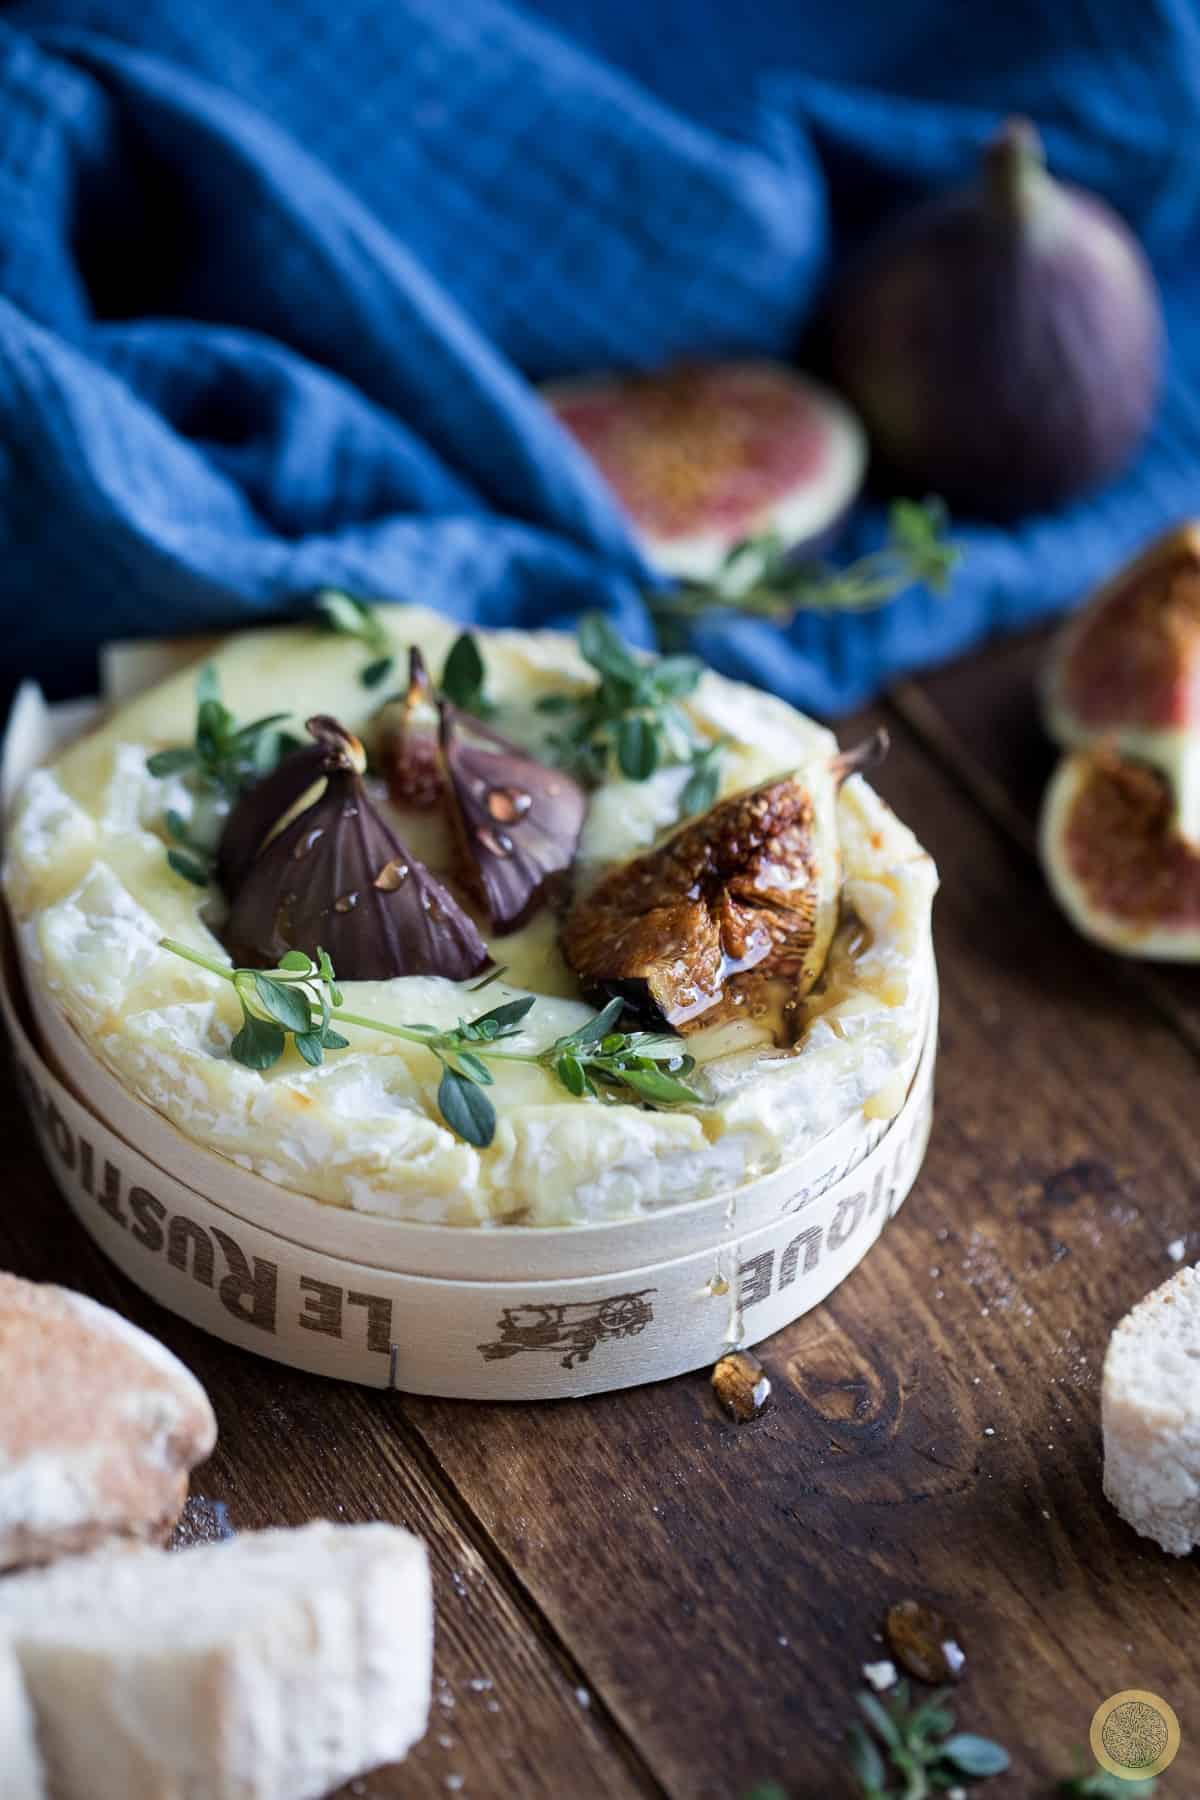 Place the figs next to the camembert and bake in the oven for 15 minutes.